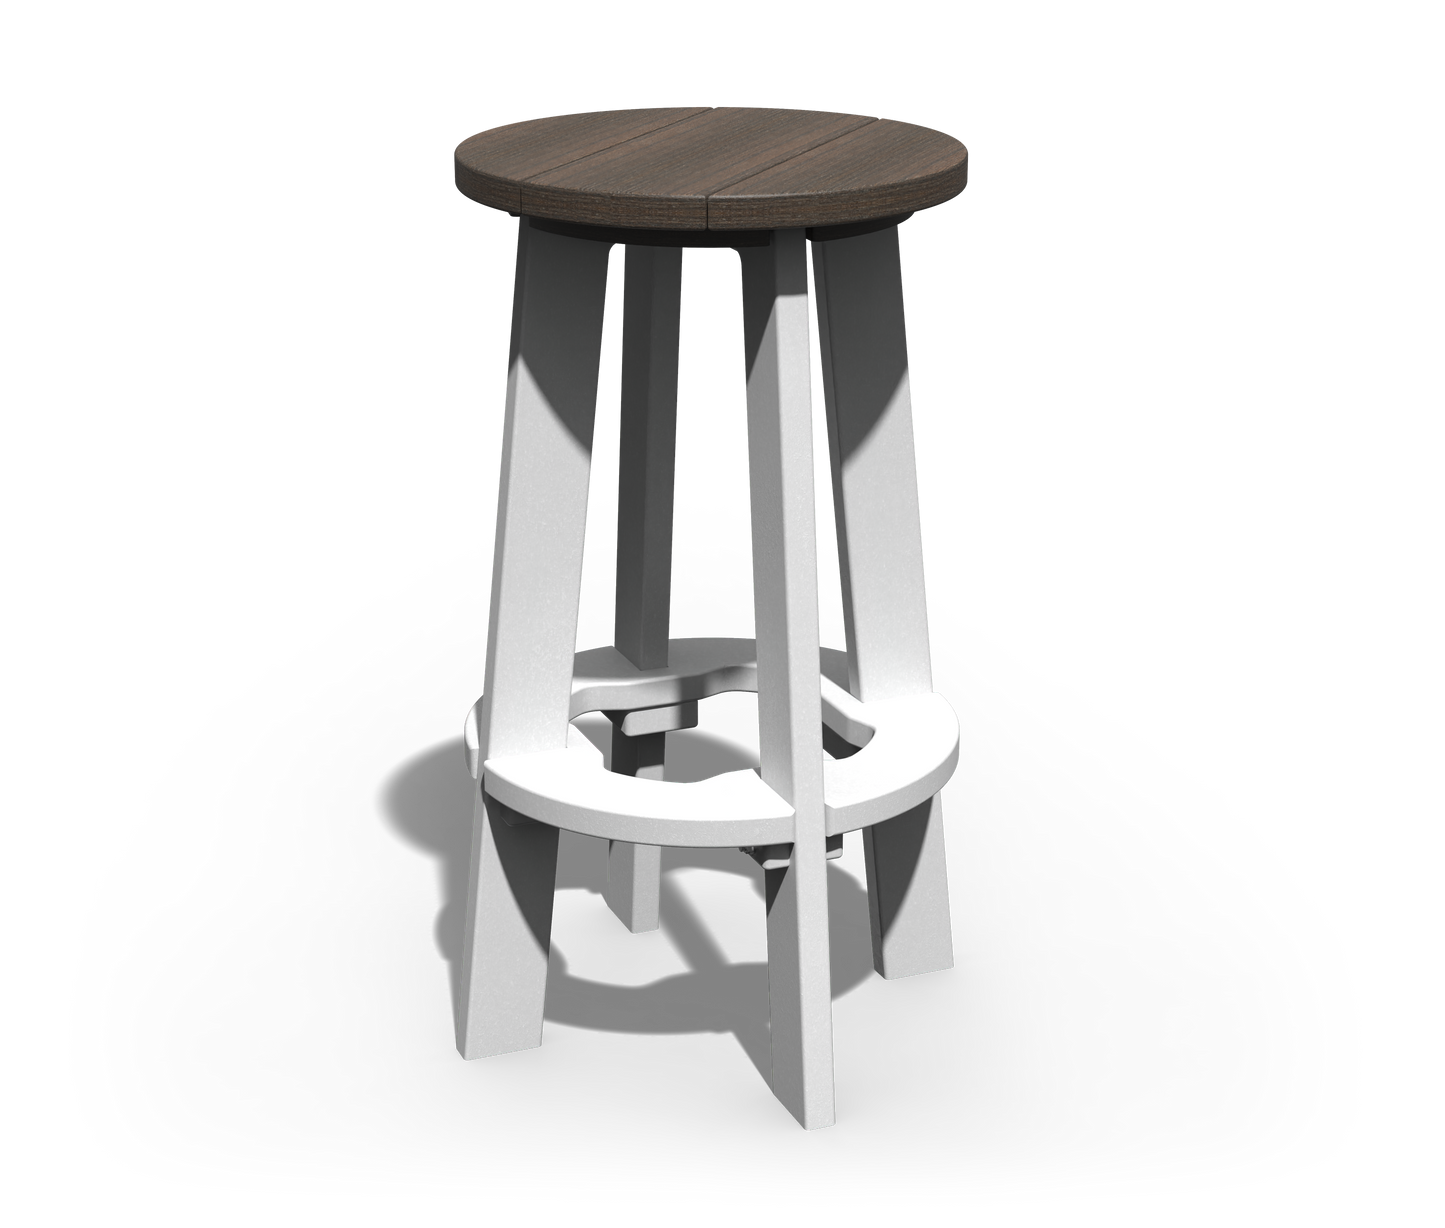 Patiova Recycled Plastic Bar Stool - LEAD TIME TO SHIP 4 WEEKS